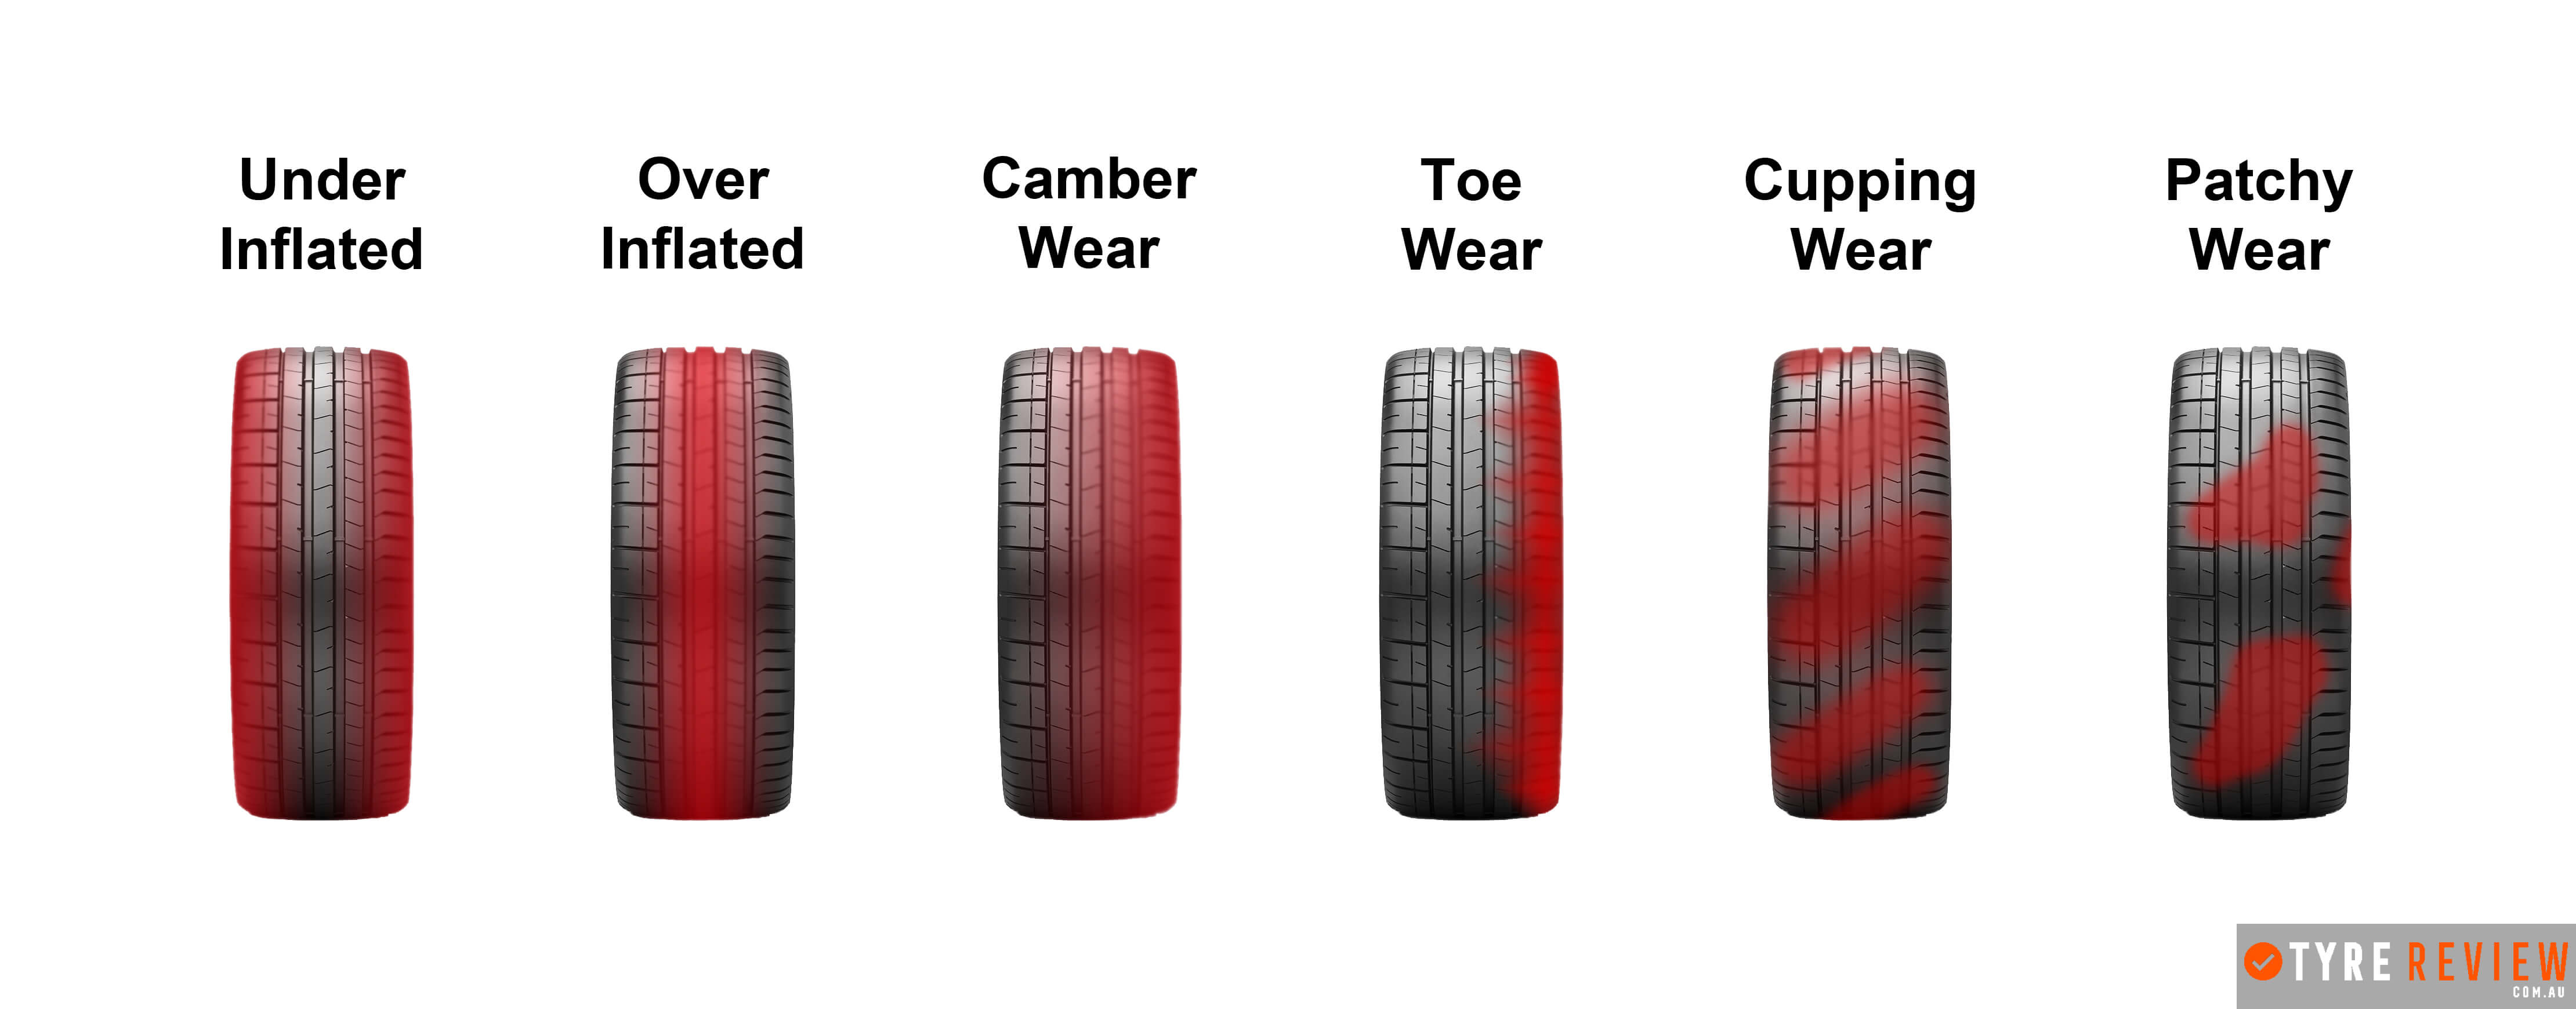 Examples of tyre wear caused by different factors